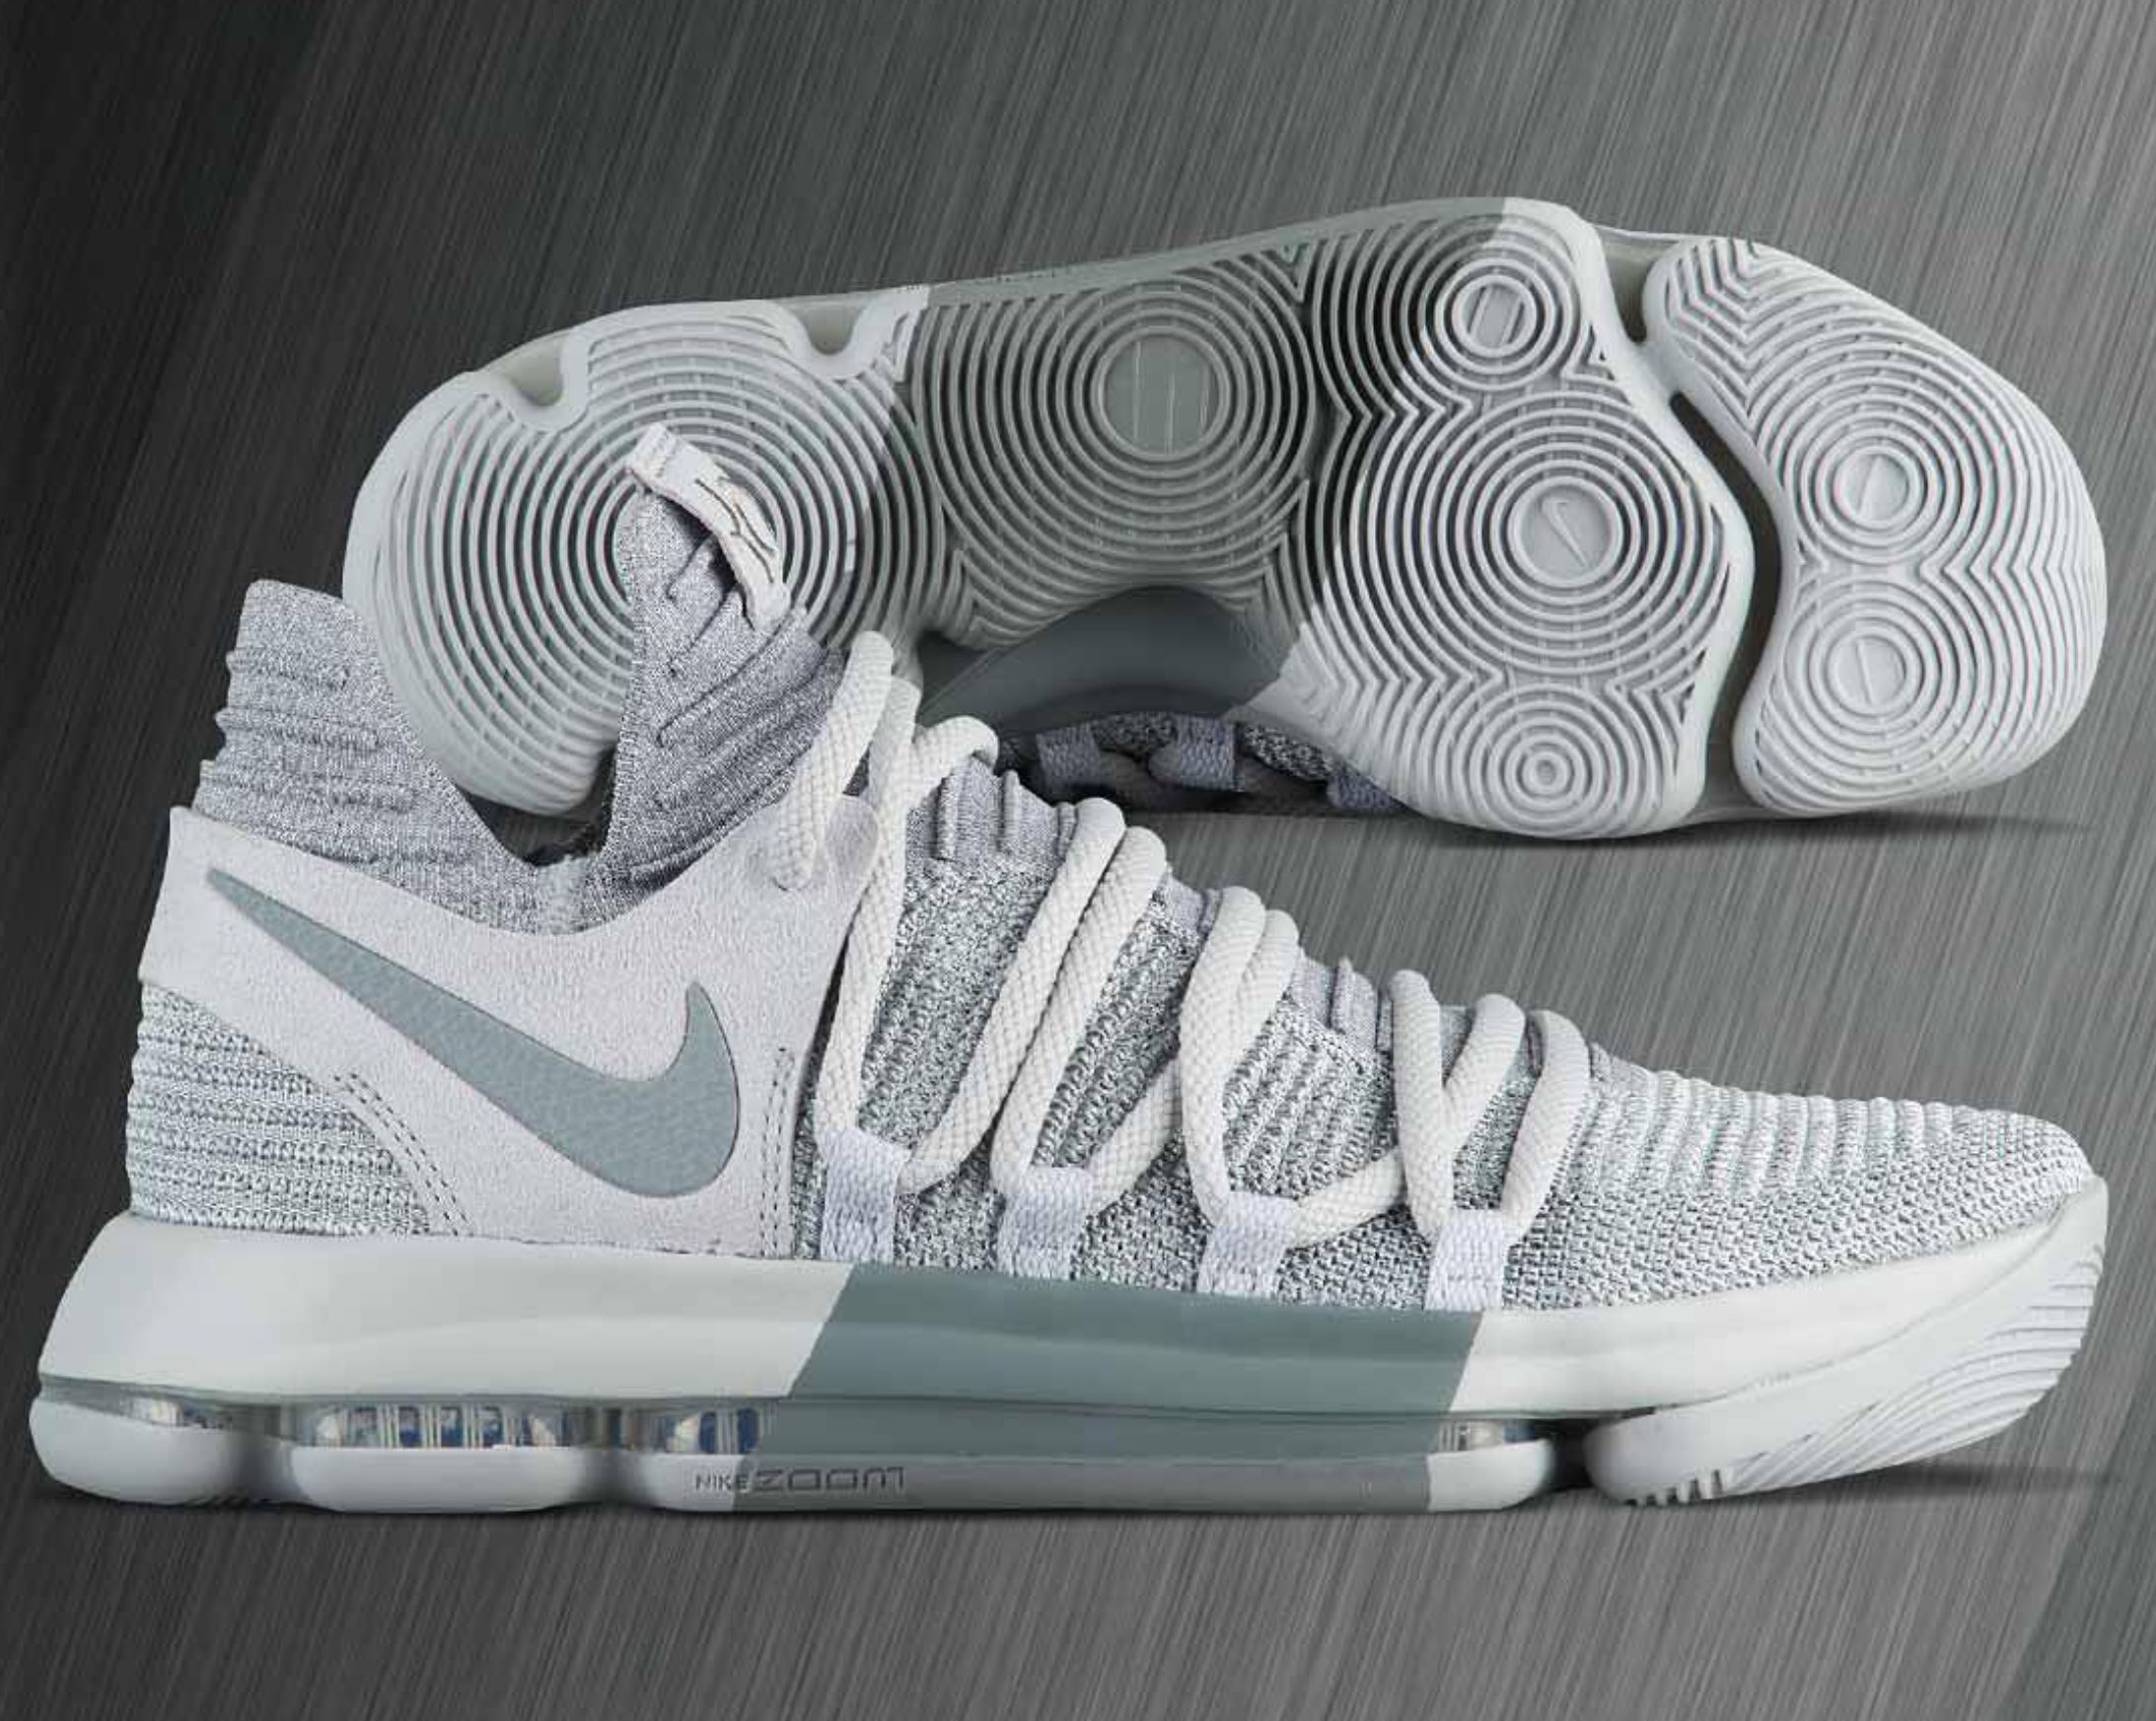 The Latest Nike KD 10 Colorway Has 